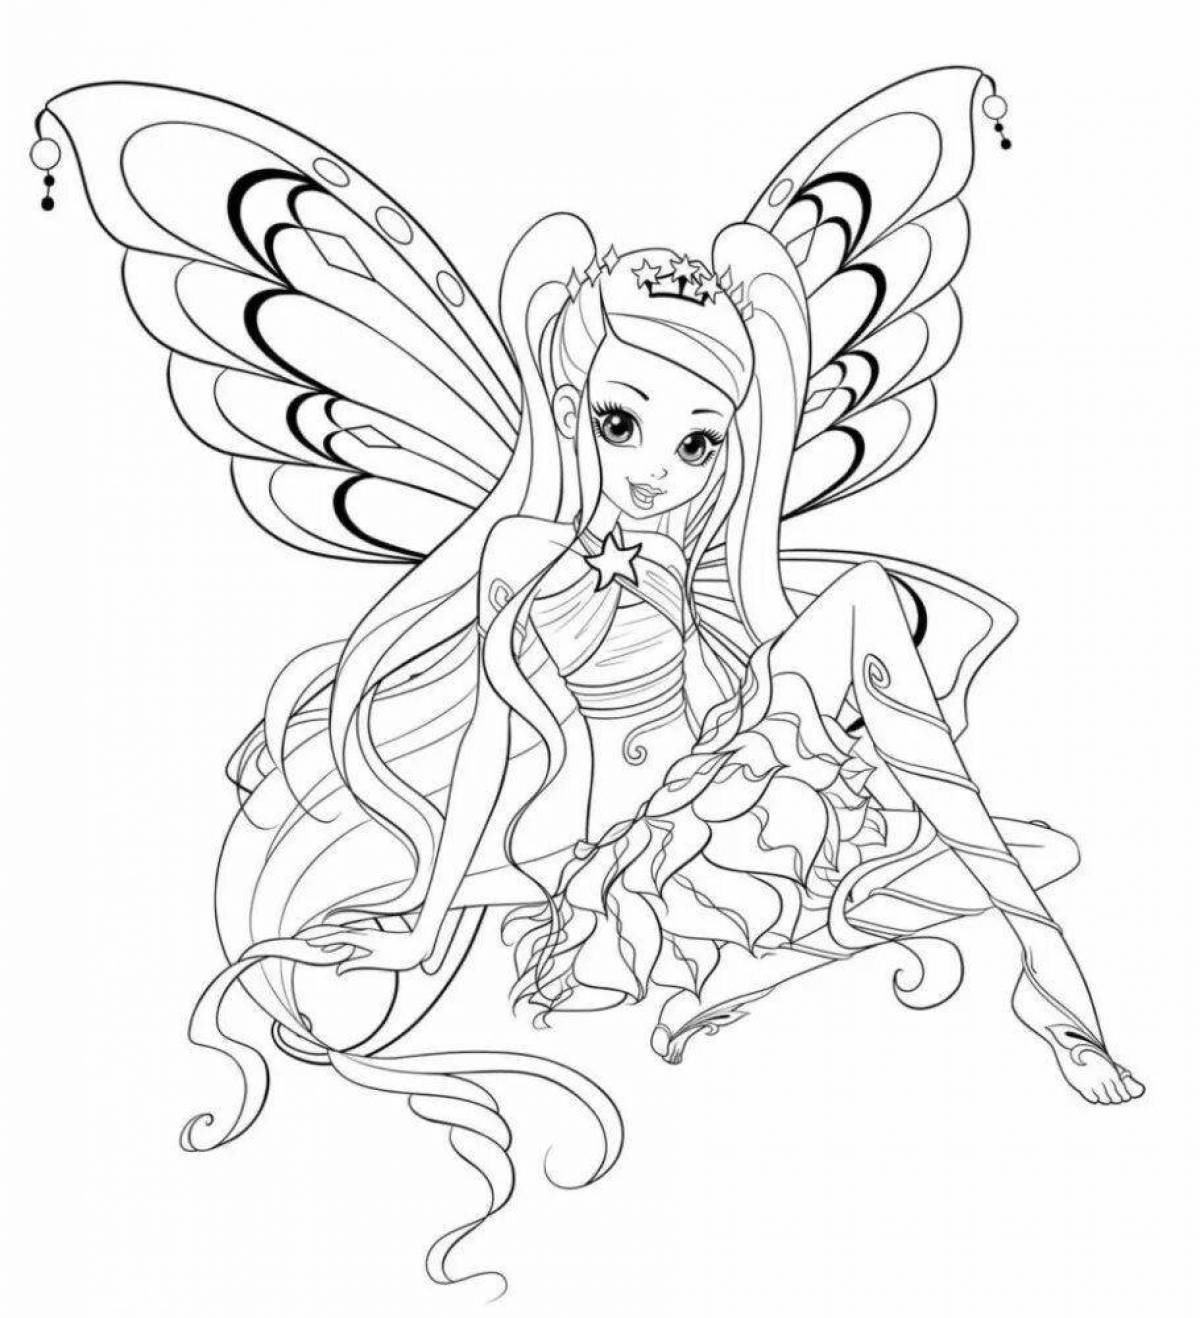 Winx magic coloring for android